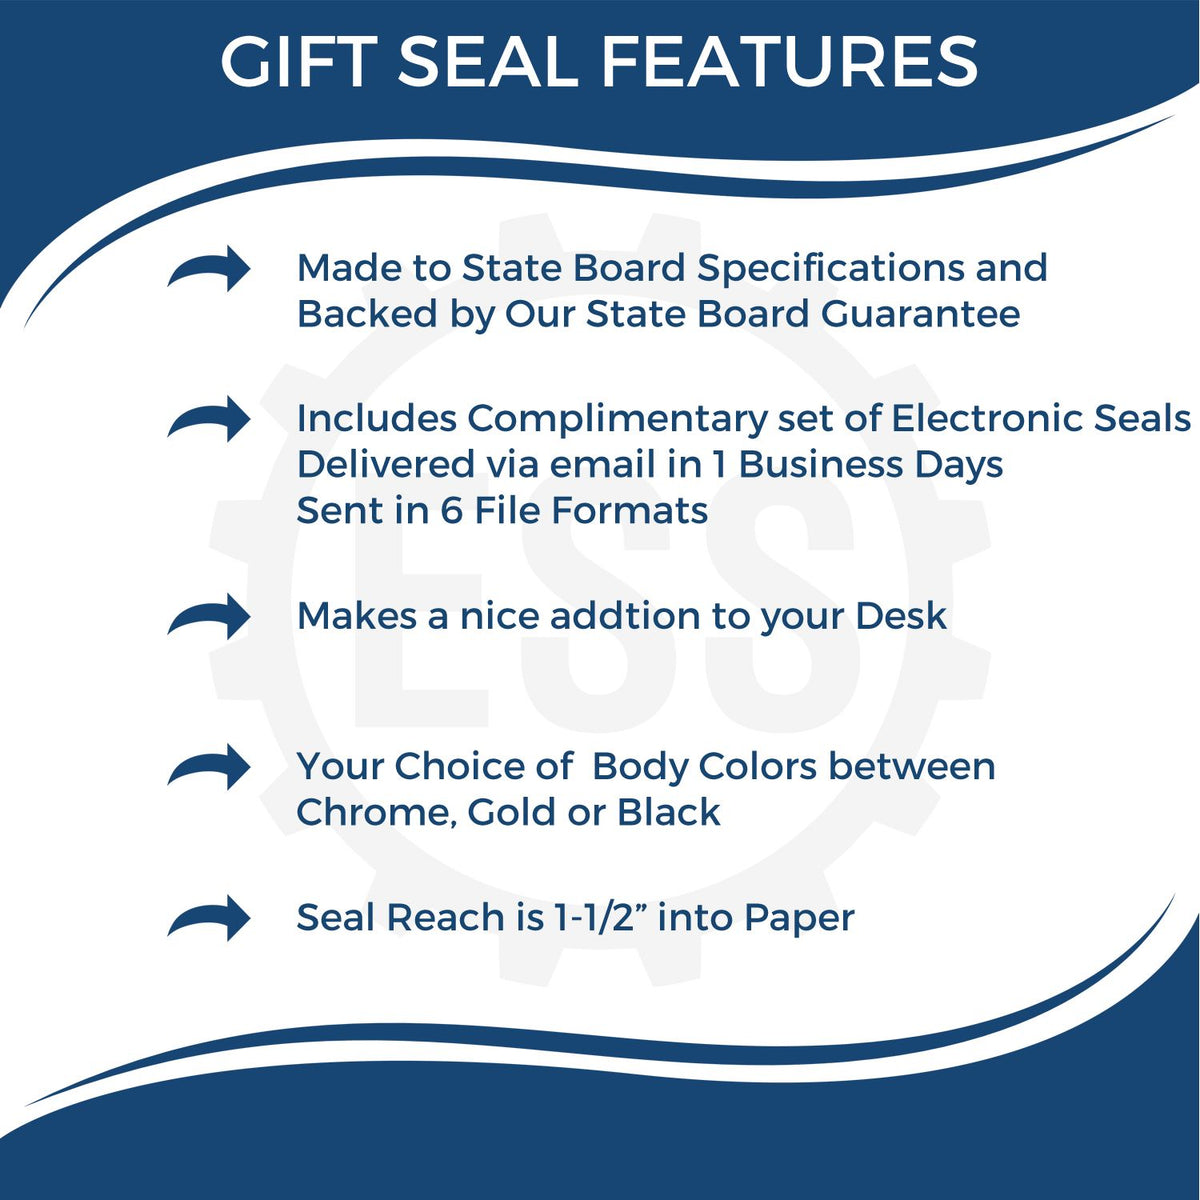 A picture of an infographic highlighting the selling points for the Gift New York Land Surveyor Seal